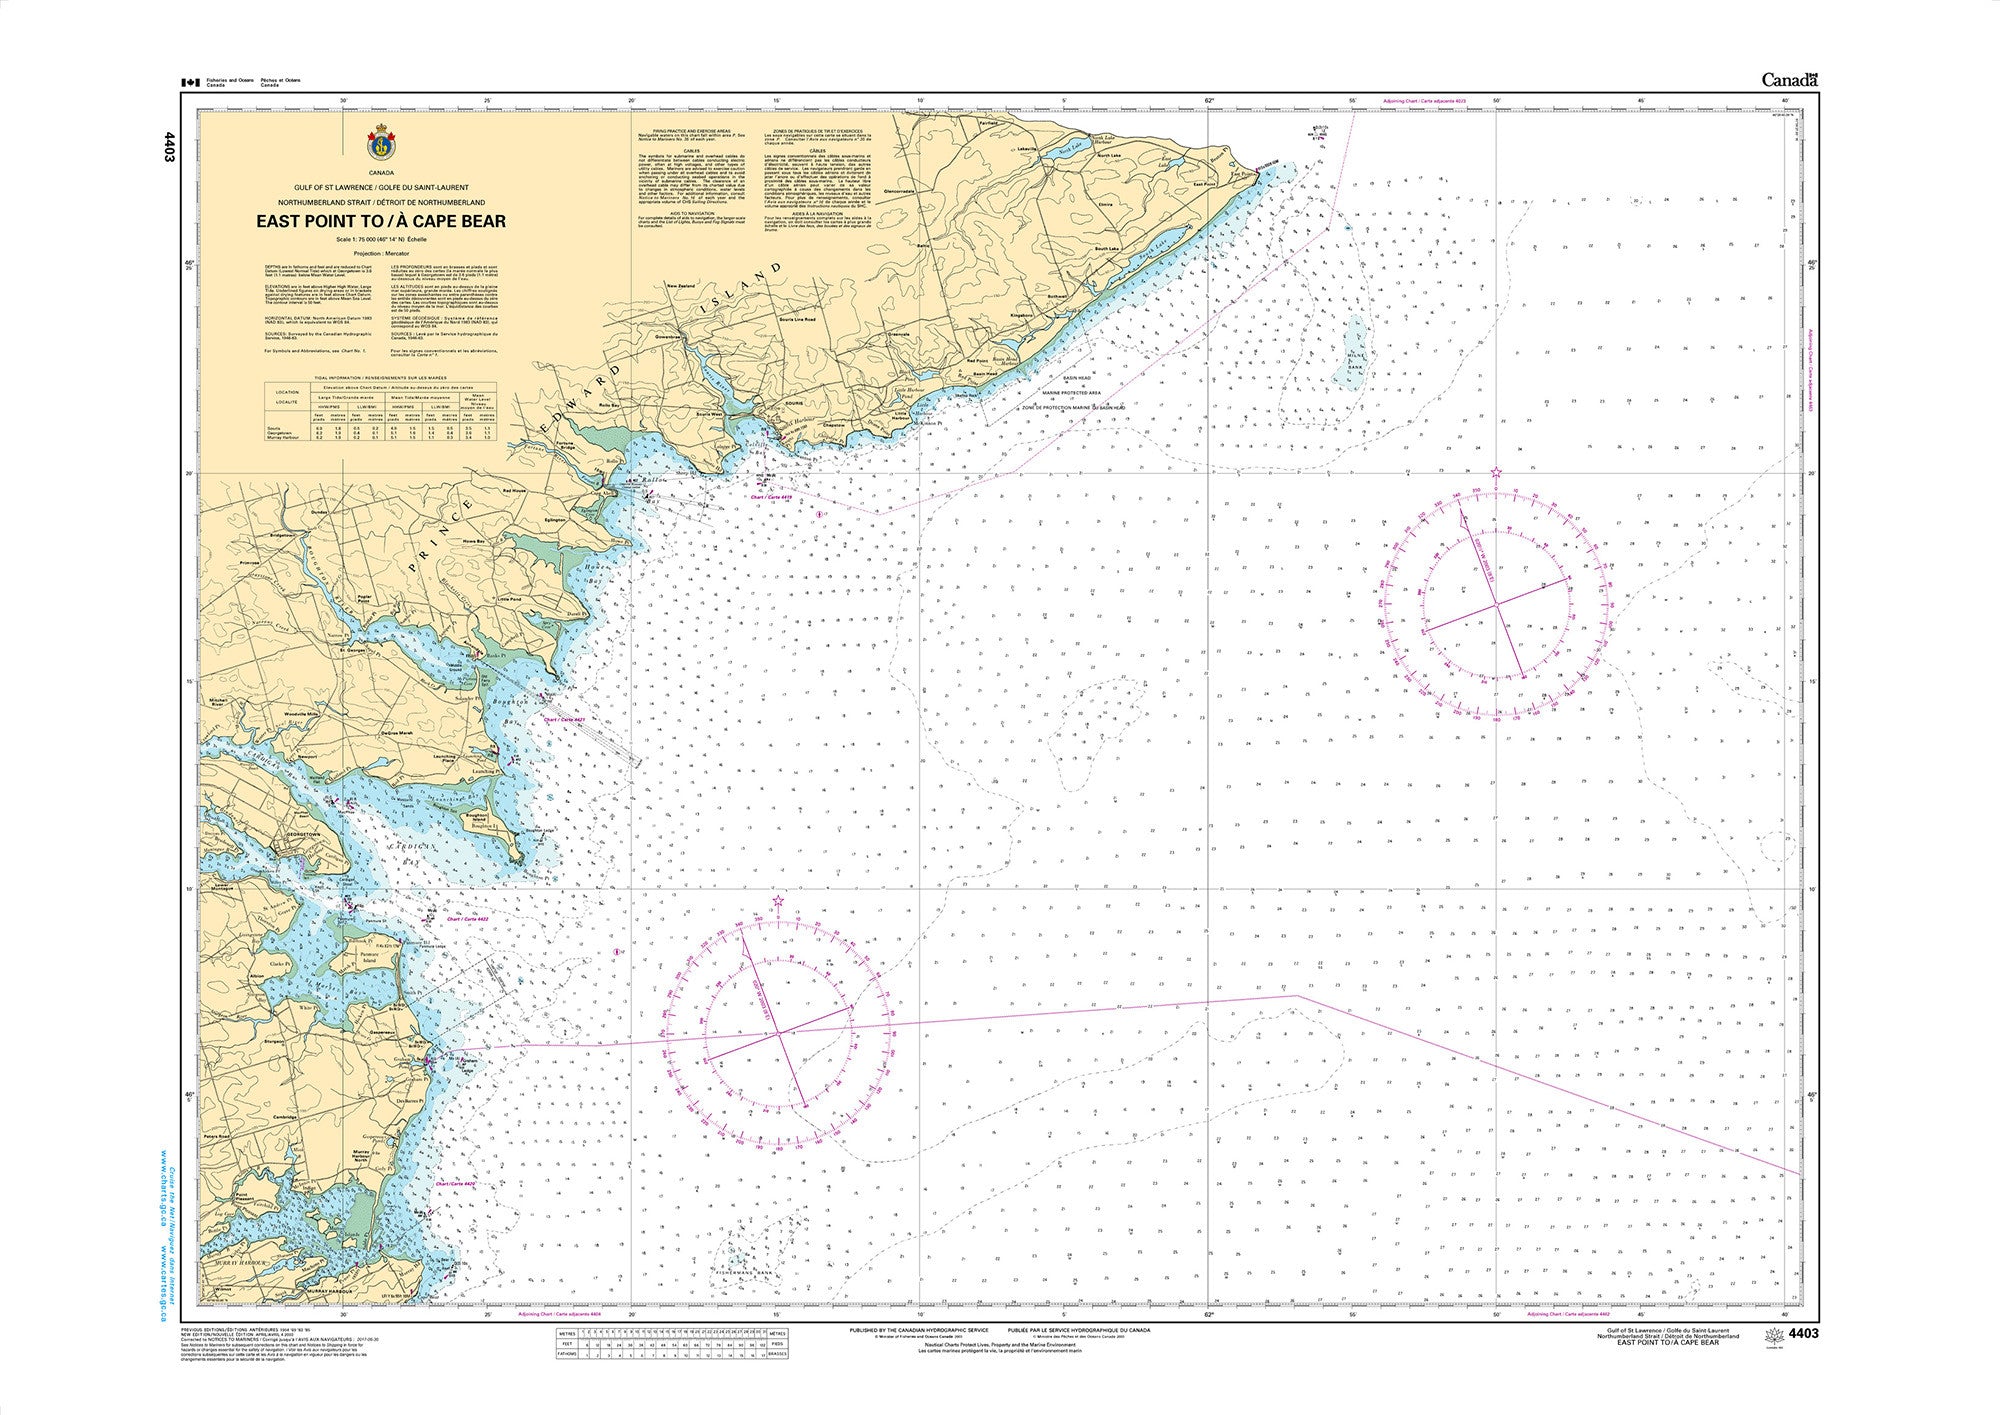 Canadian Hydrographic Service Nautical Chart CHS4403: East Point to/à Cape Bear